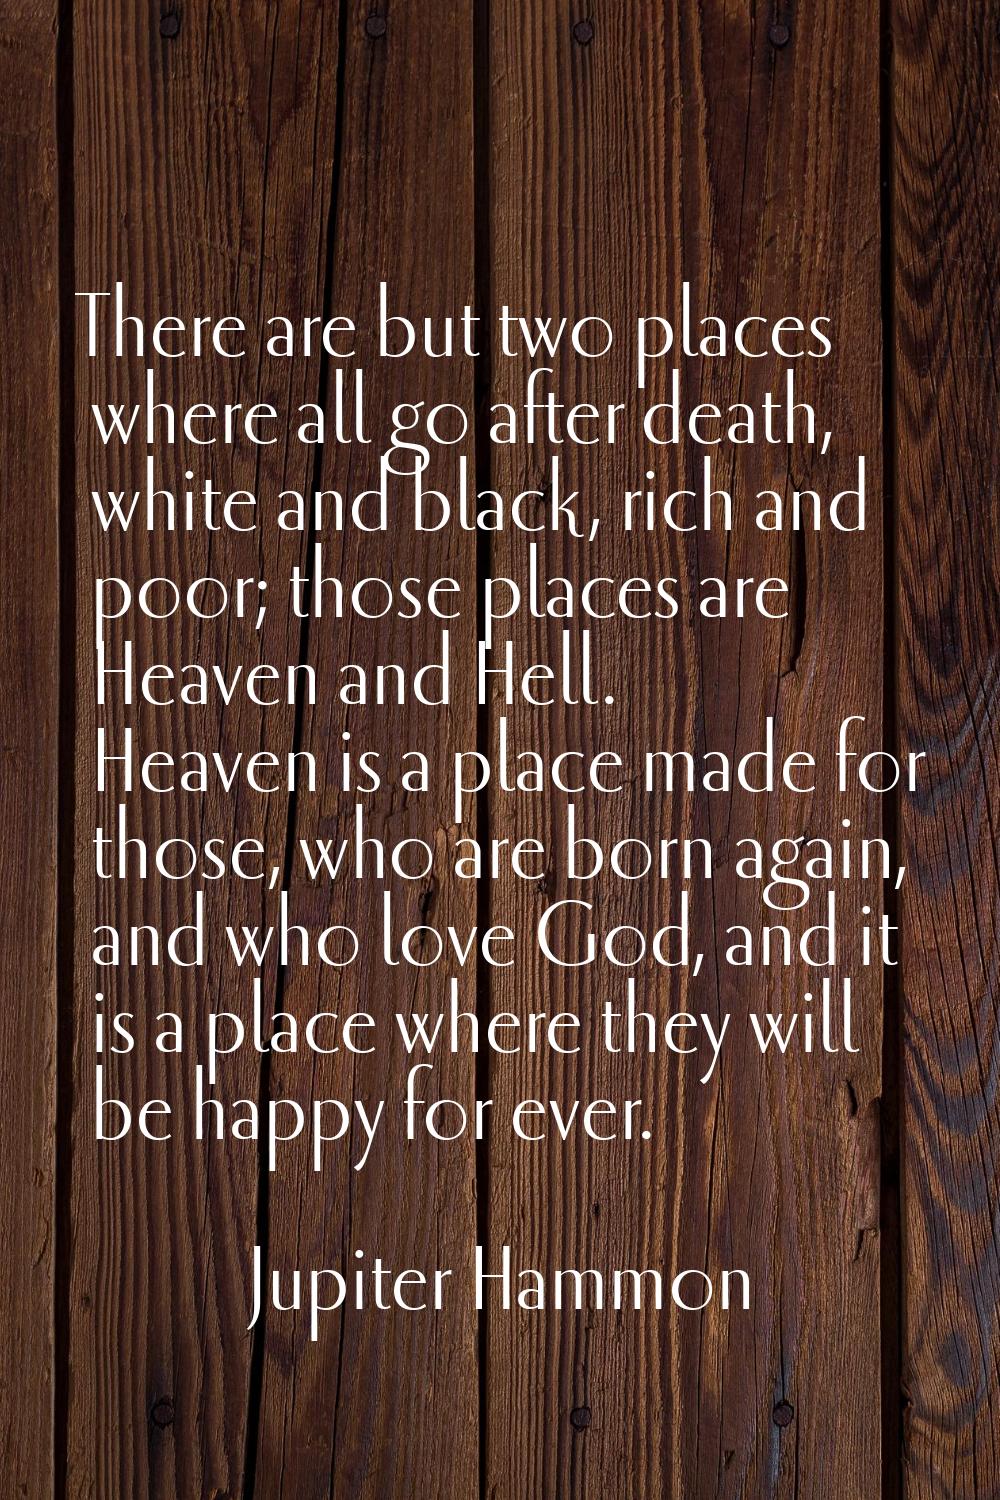 There are but two places where all go after death, white and black, rich and poor; those places are